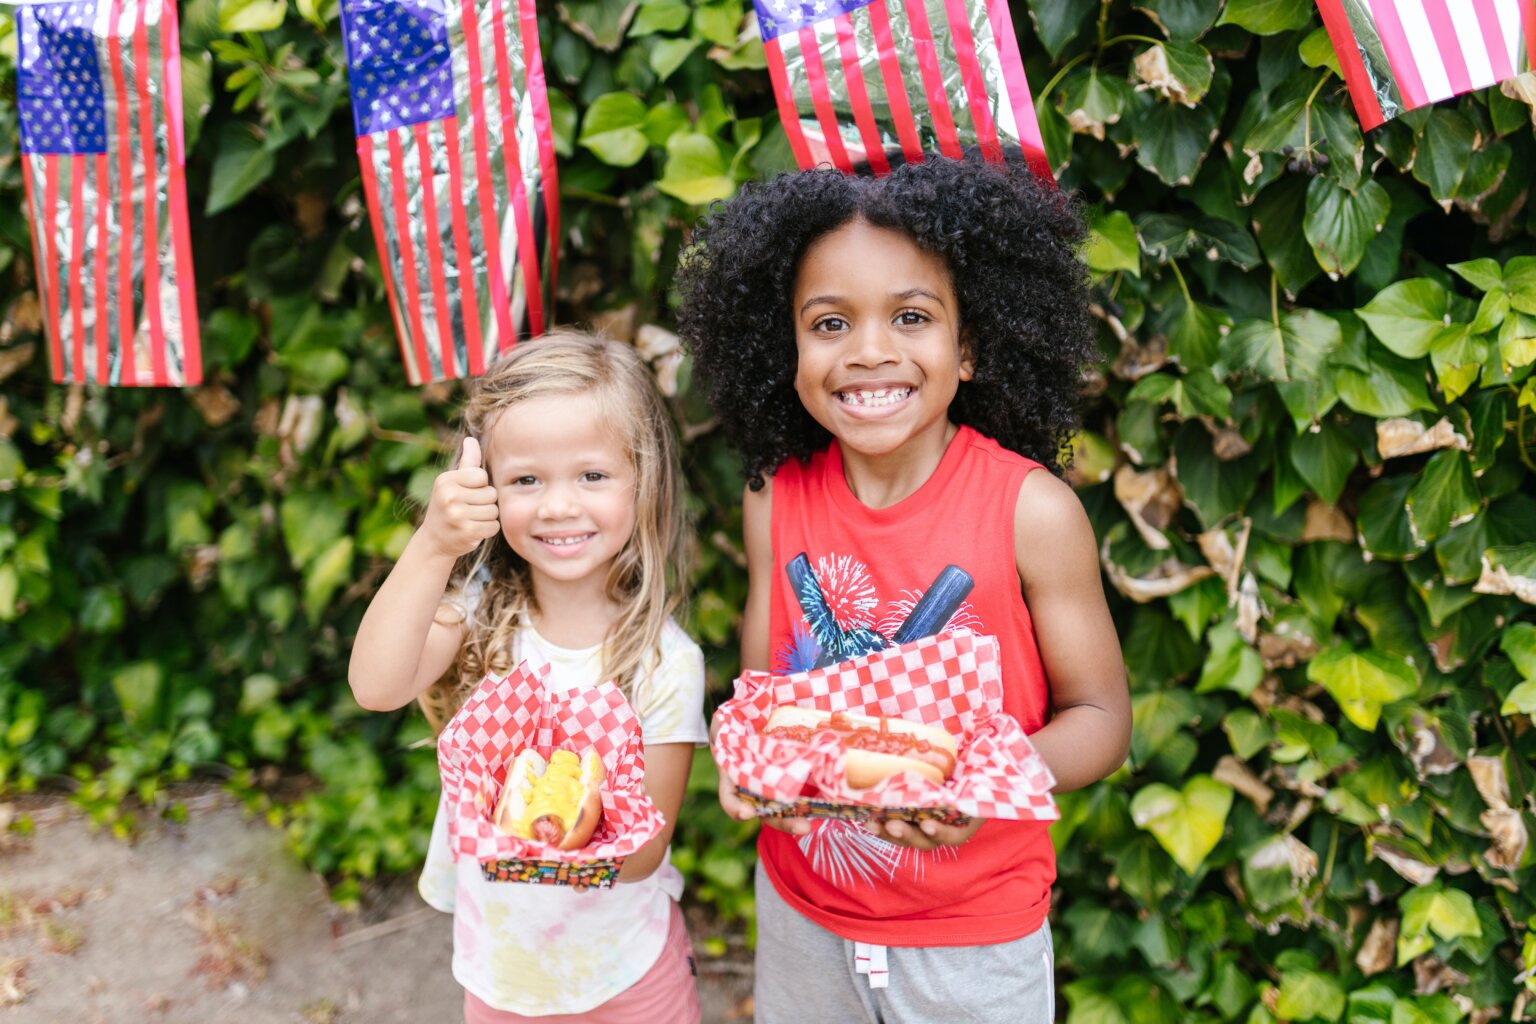 Two girls holding hot dogs while standing in front of American flag party decorations.